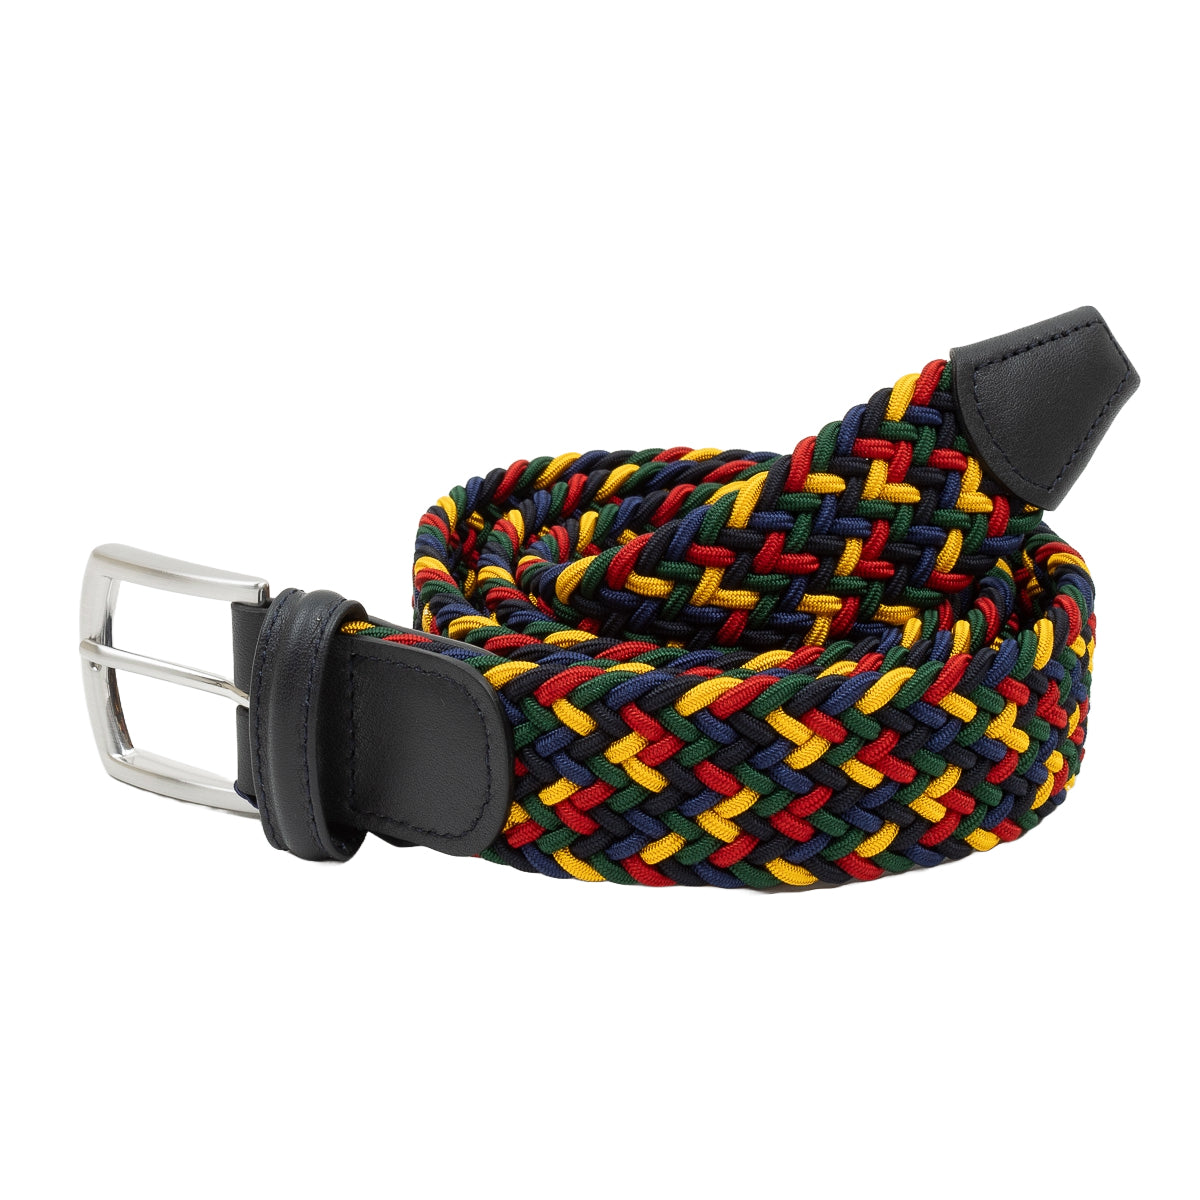 Buy online Anderson's Belt - Green/Red/Yellow Woven Elasticated